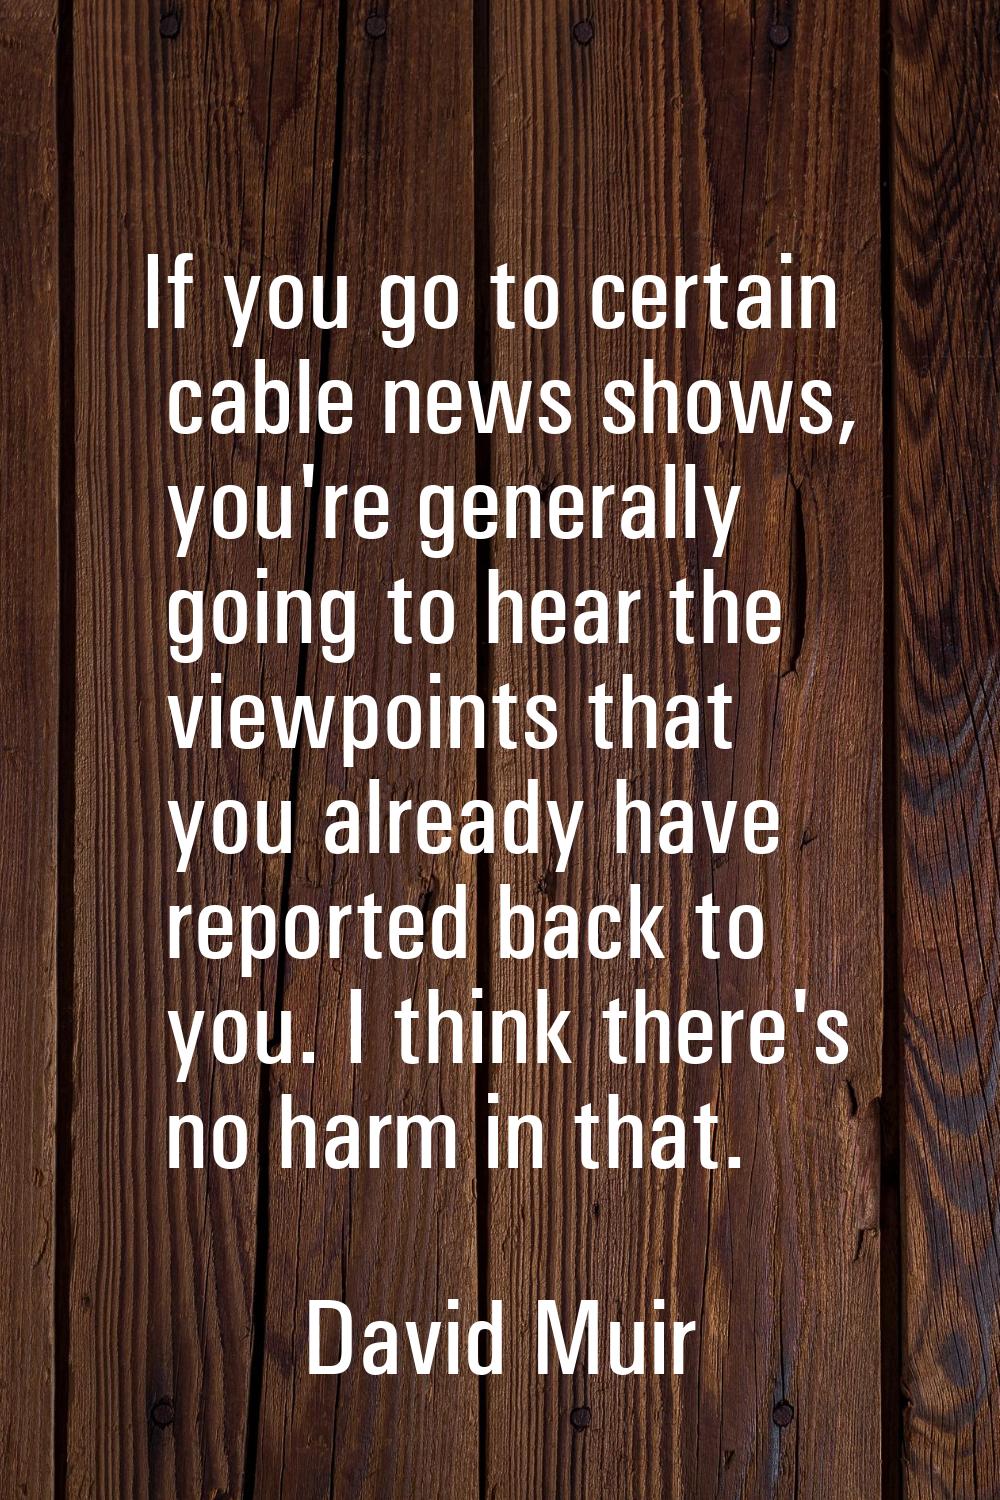 If you go to certain cable news shows, you're generally going to hear the viewpoints that you alrea